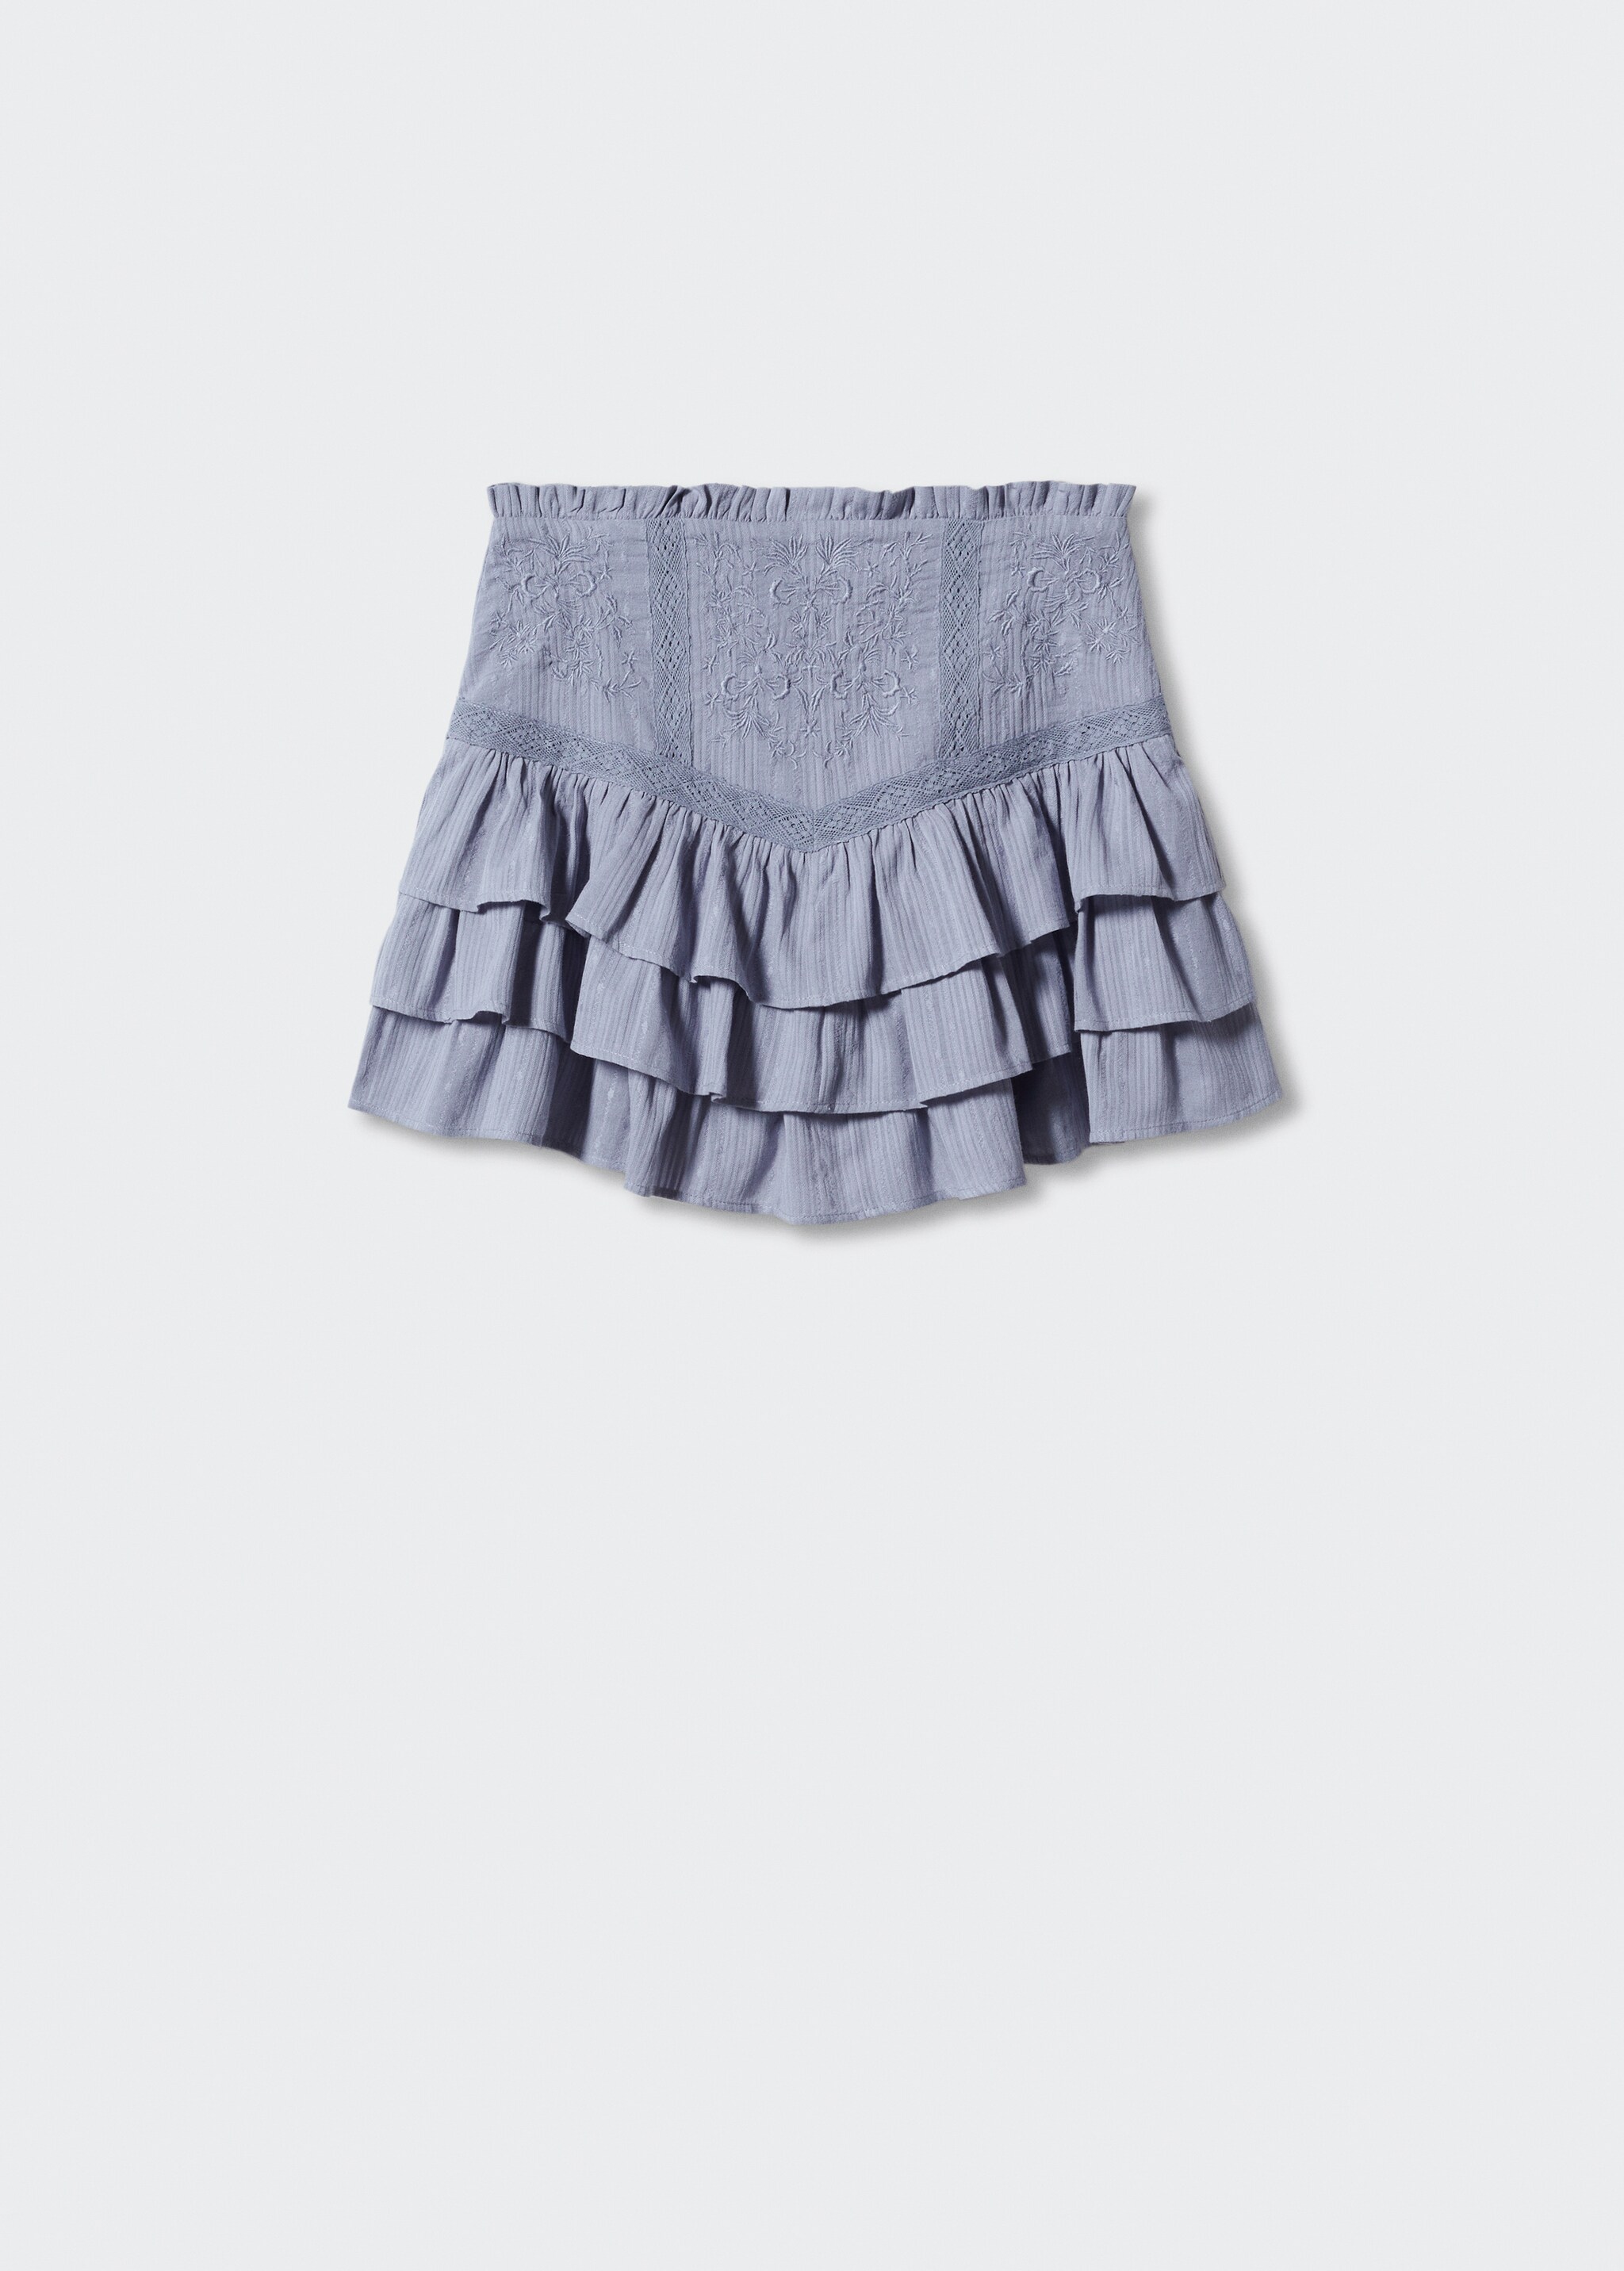 Embroidered ruffled skirt - Article without model